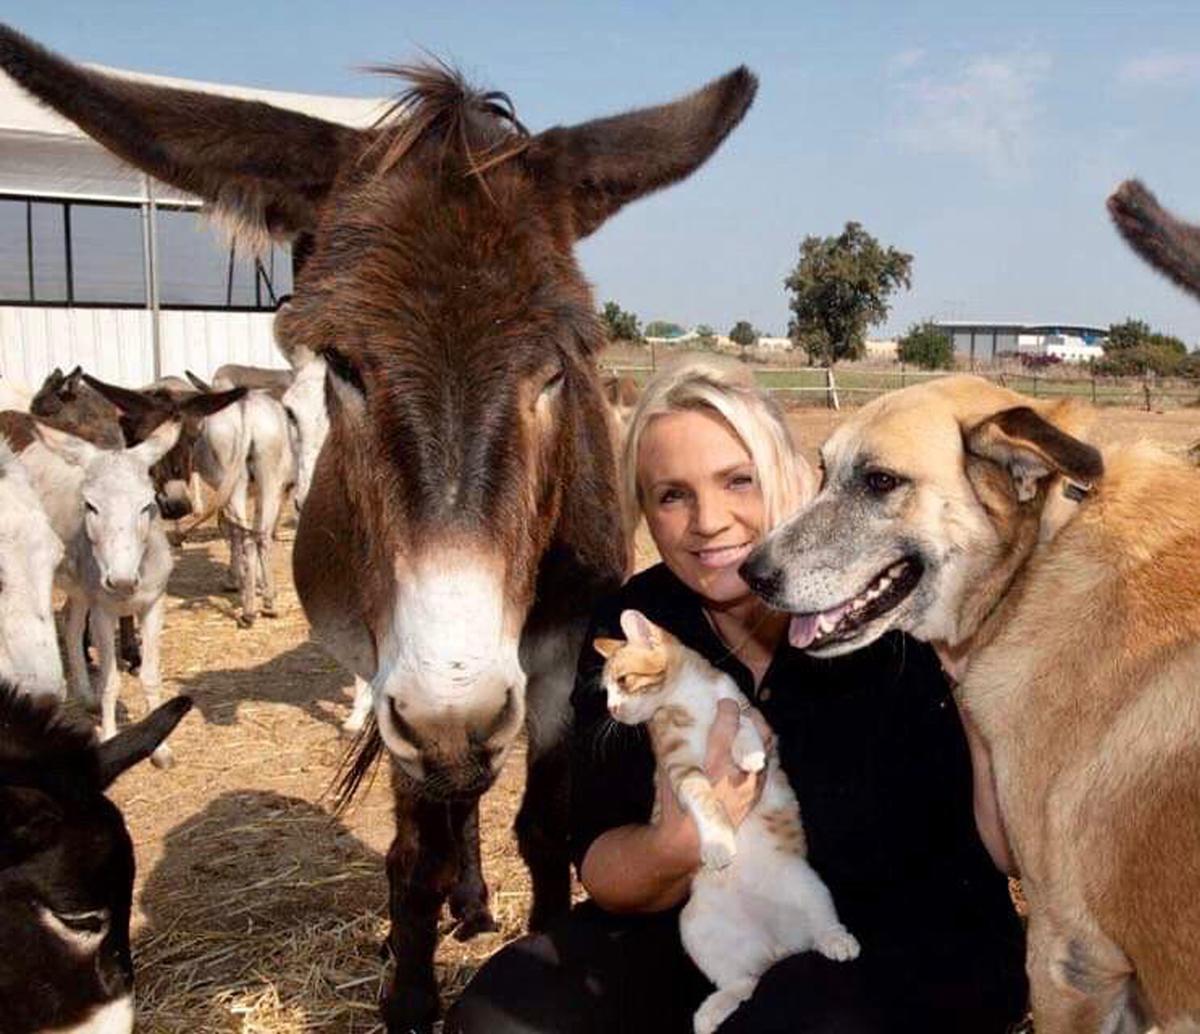 Lucy Fensom, 49, from Brighton, England, is a big animal lover. (Caters News)